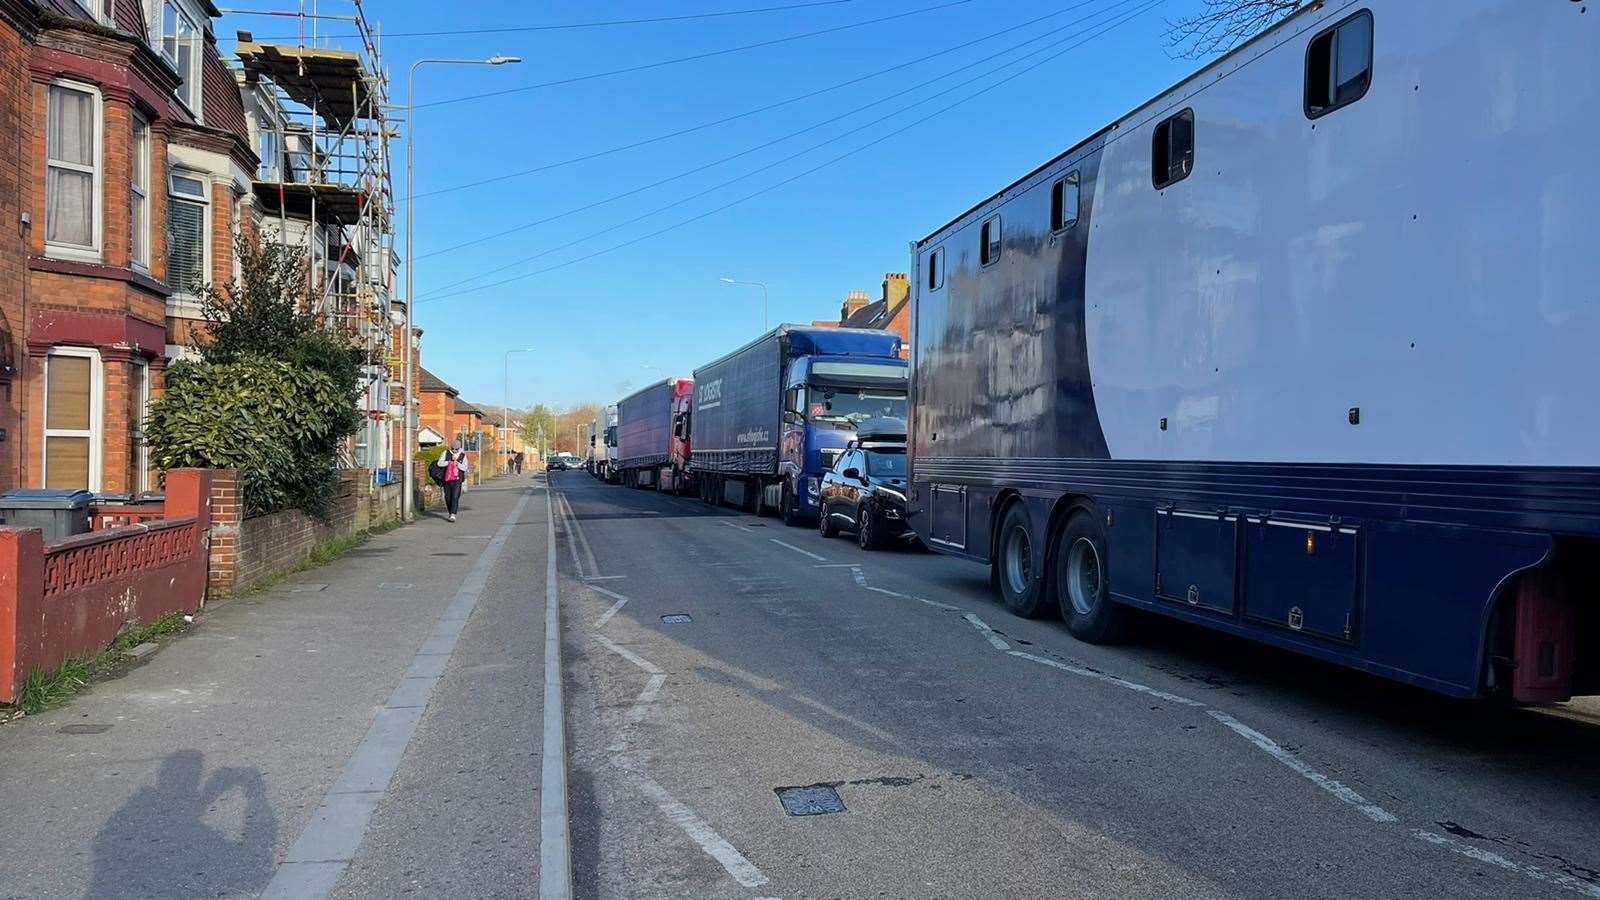 Lorries going nowhere in the streets of Dover. Picture: UKNIP